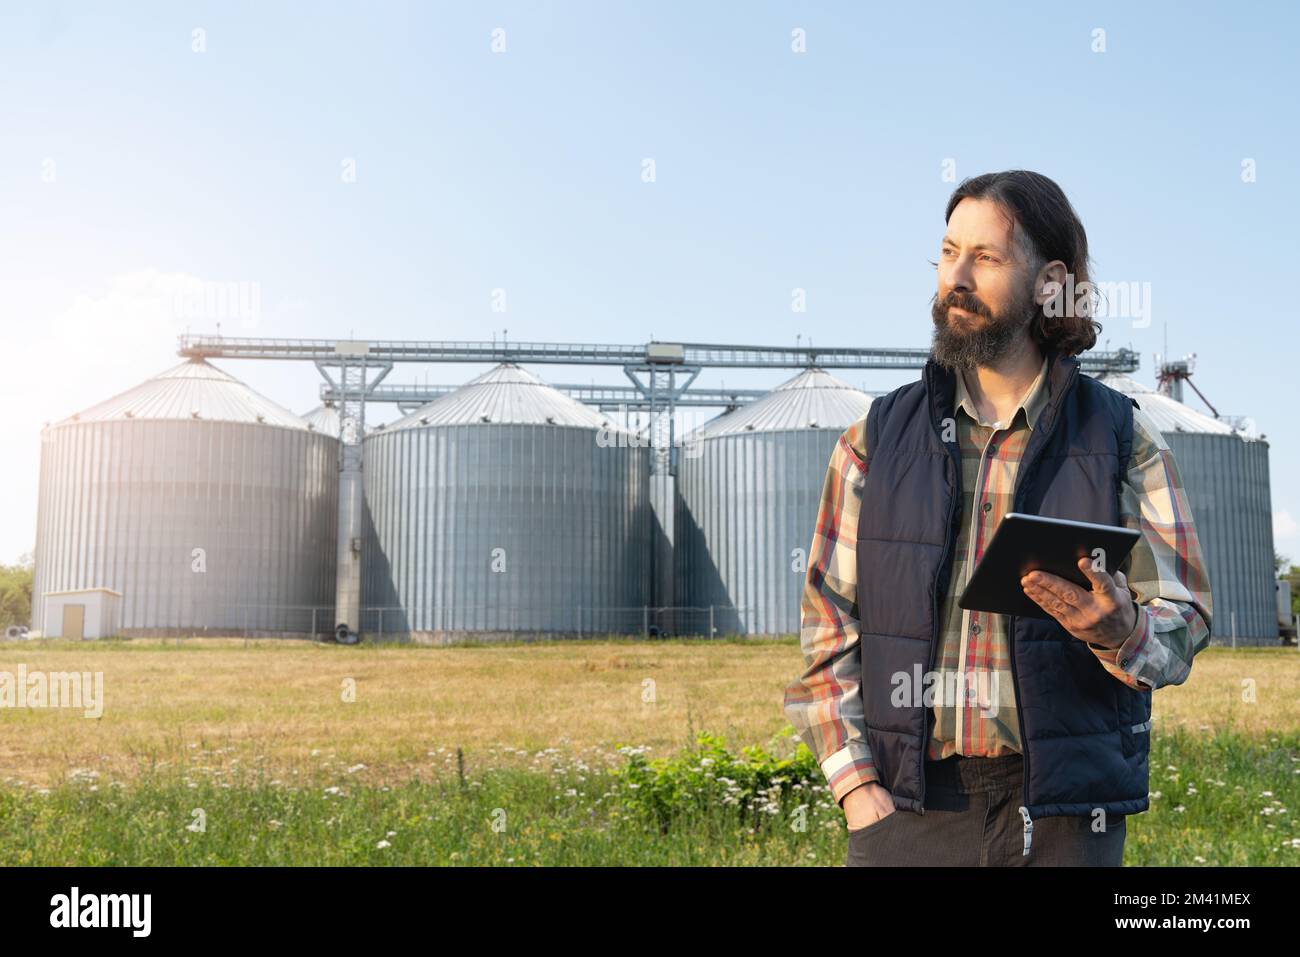 Farmer with digital tablet in front of agricultural silo Stock Photo